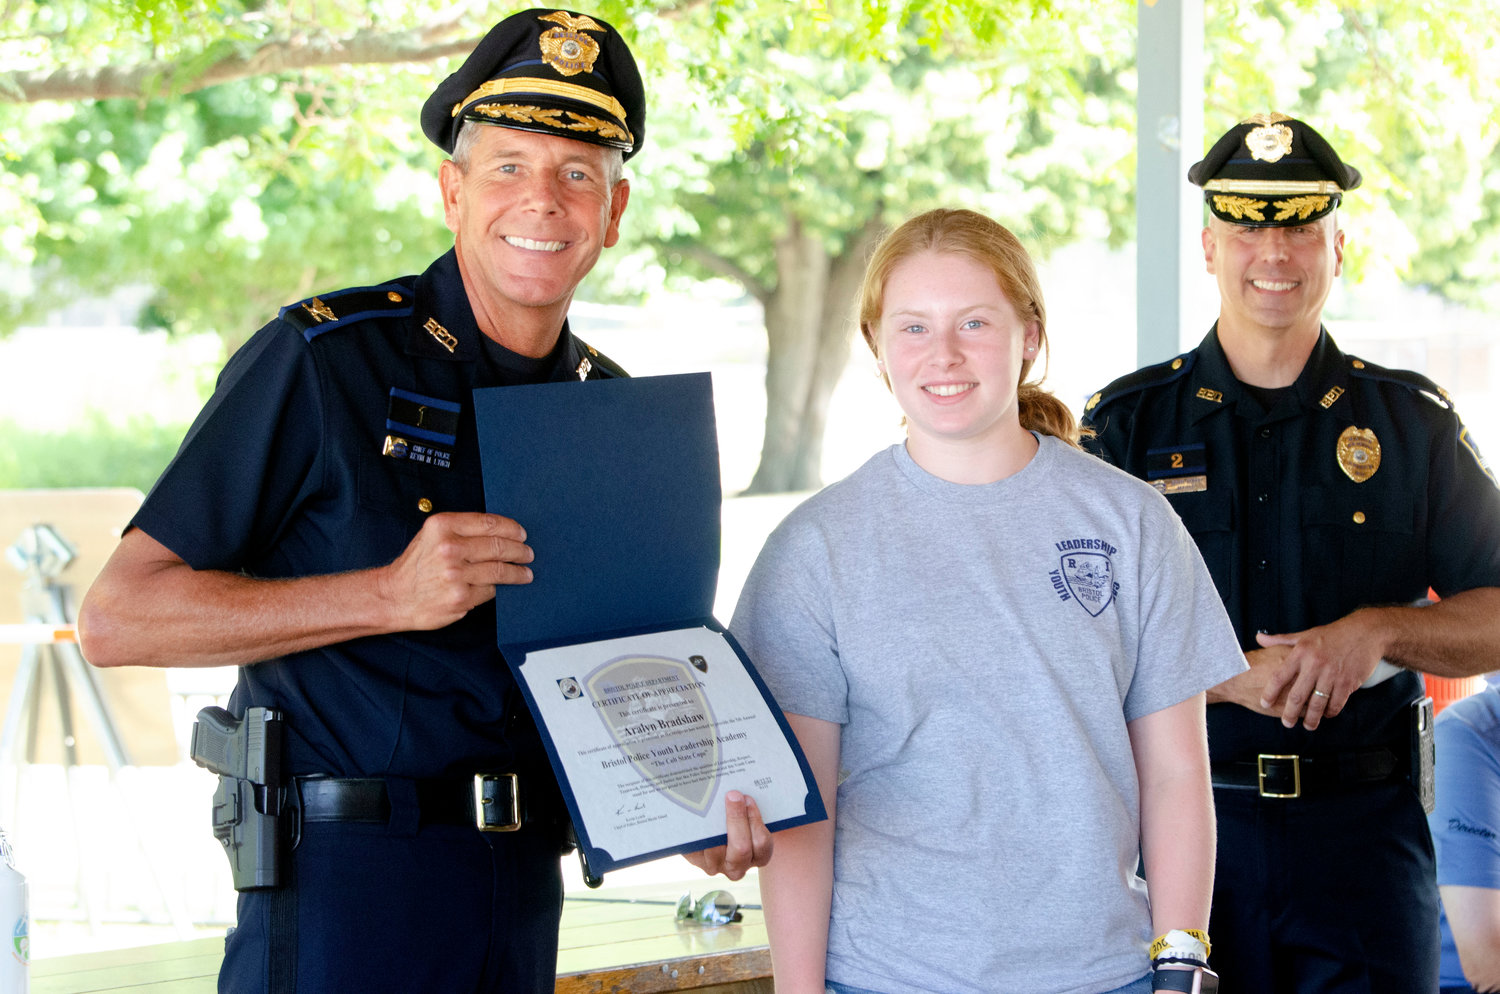 Bristol Police Chief Kevin Lynch (left) and Major Brian Burke pose with Aralyn Bradshaw after she received a certificate of appreciation during the Bristol Police Youth Leadership Academy at the town beach on Friday.